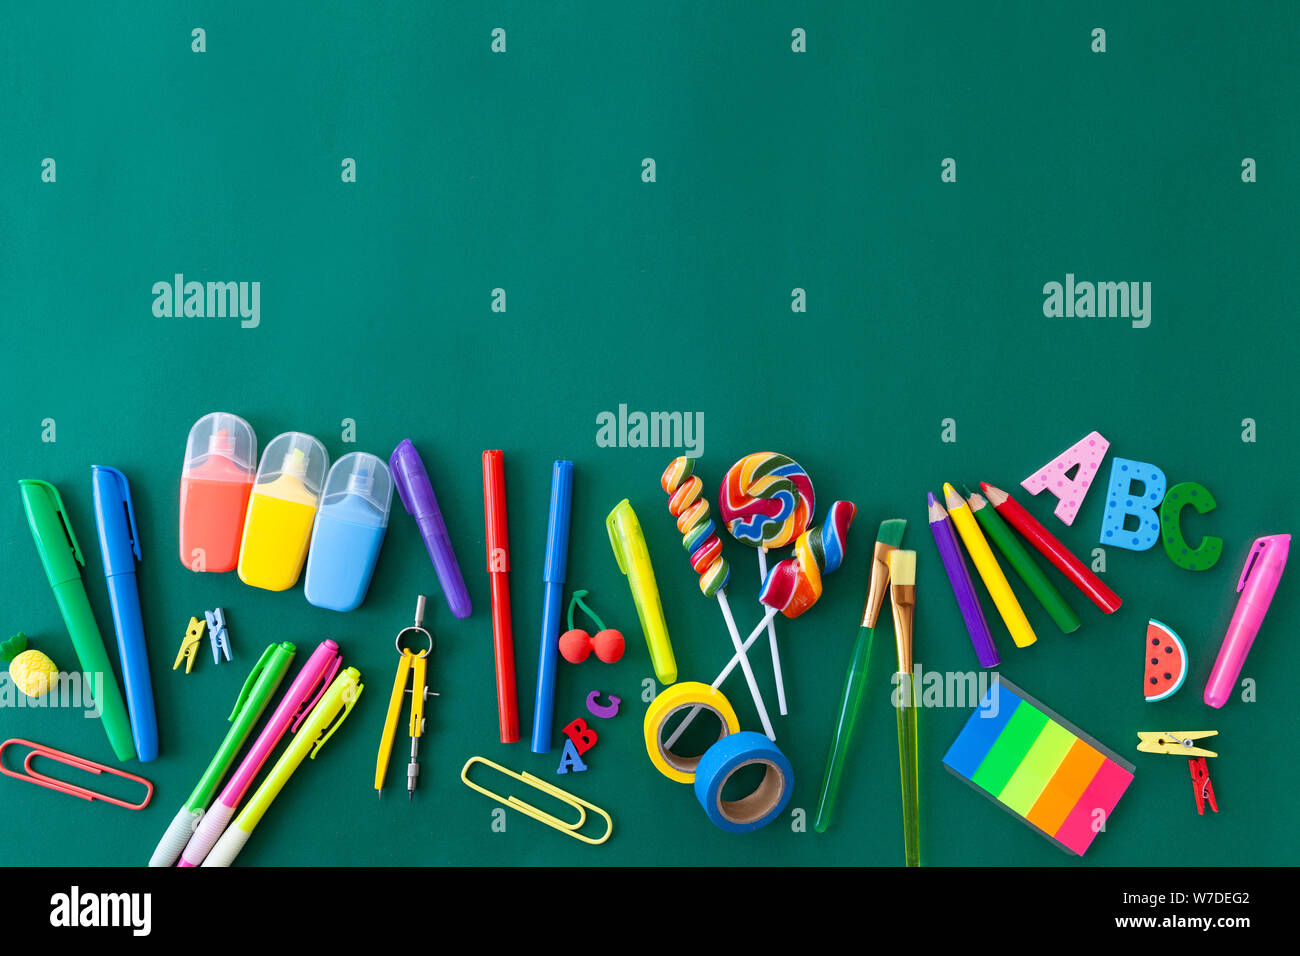 Cheerful colorful background with school and offlice supplies Stock Photo